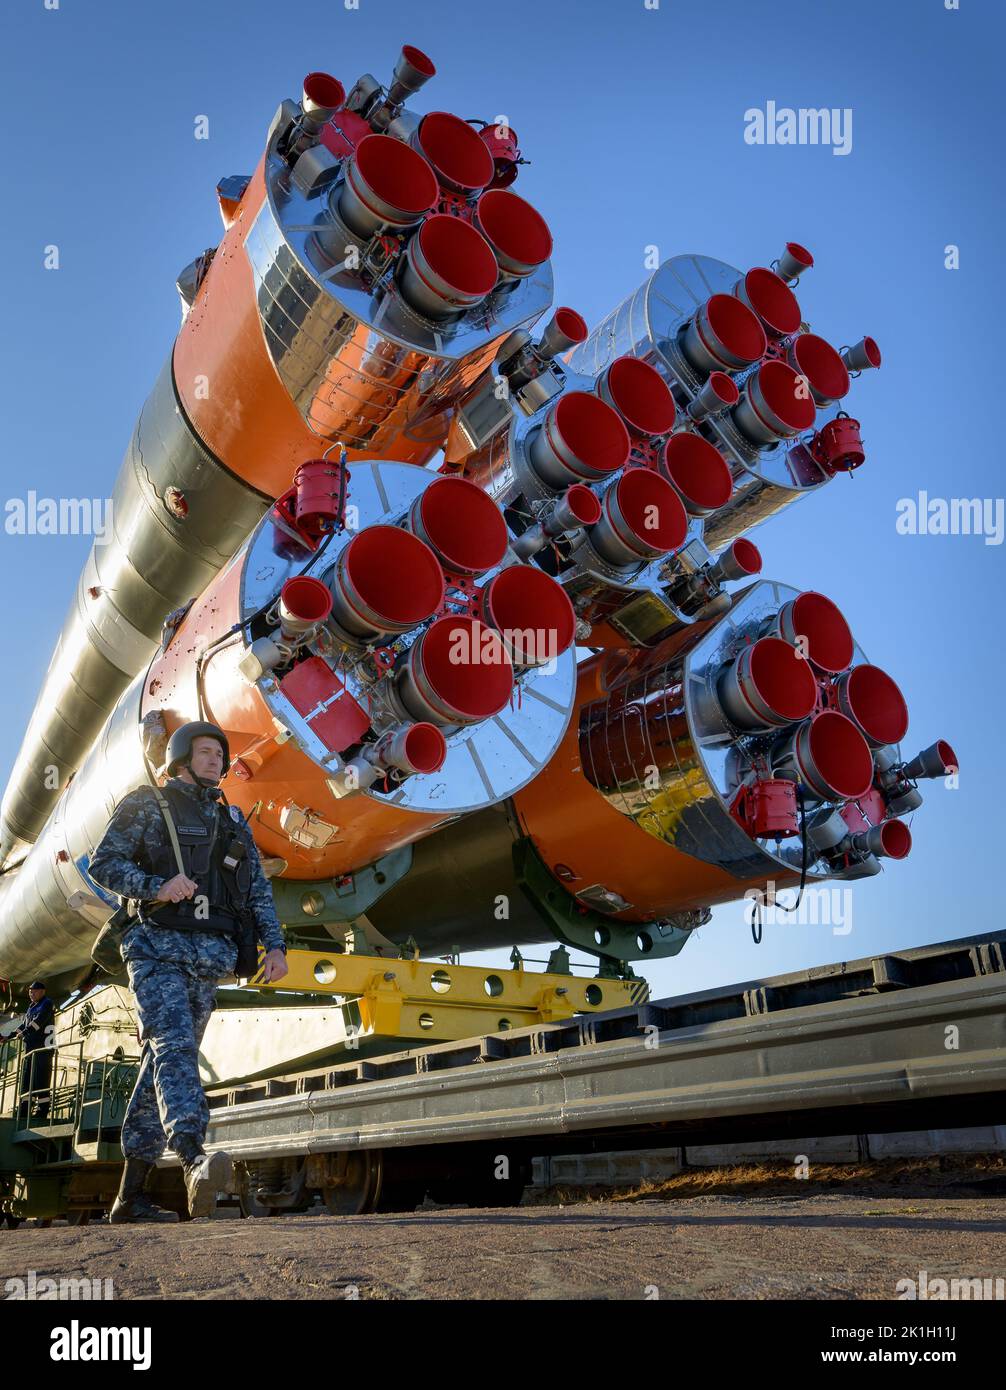 Baikonur , Kazakhstan. 18 September, 2022. A Russian soldier stands guard as the Soyuz MS-22 spacecraft and booster rocket are rolled out by train to launch pad 31 of the Baikonur Cosmodrome, September 18, 2022 in Baikonur, Kazakhstan. International Space Station Expedition 68 crew members astronaut Frank Rubio of NASA, and cosmonauts Sergey Prokopyev and Dmitri Petelin of Roscosmos are set to launch September 21st to the orbiting laboratory.  Credit: Bill Ingalls/NASA/Alamy Live News Stock Photo